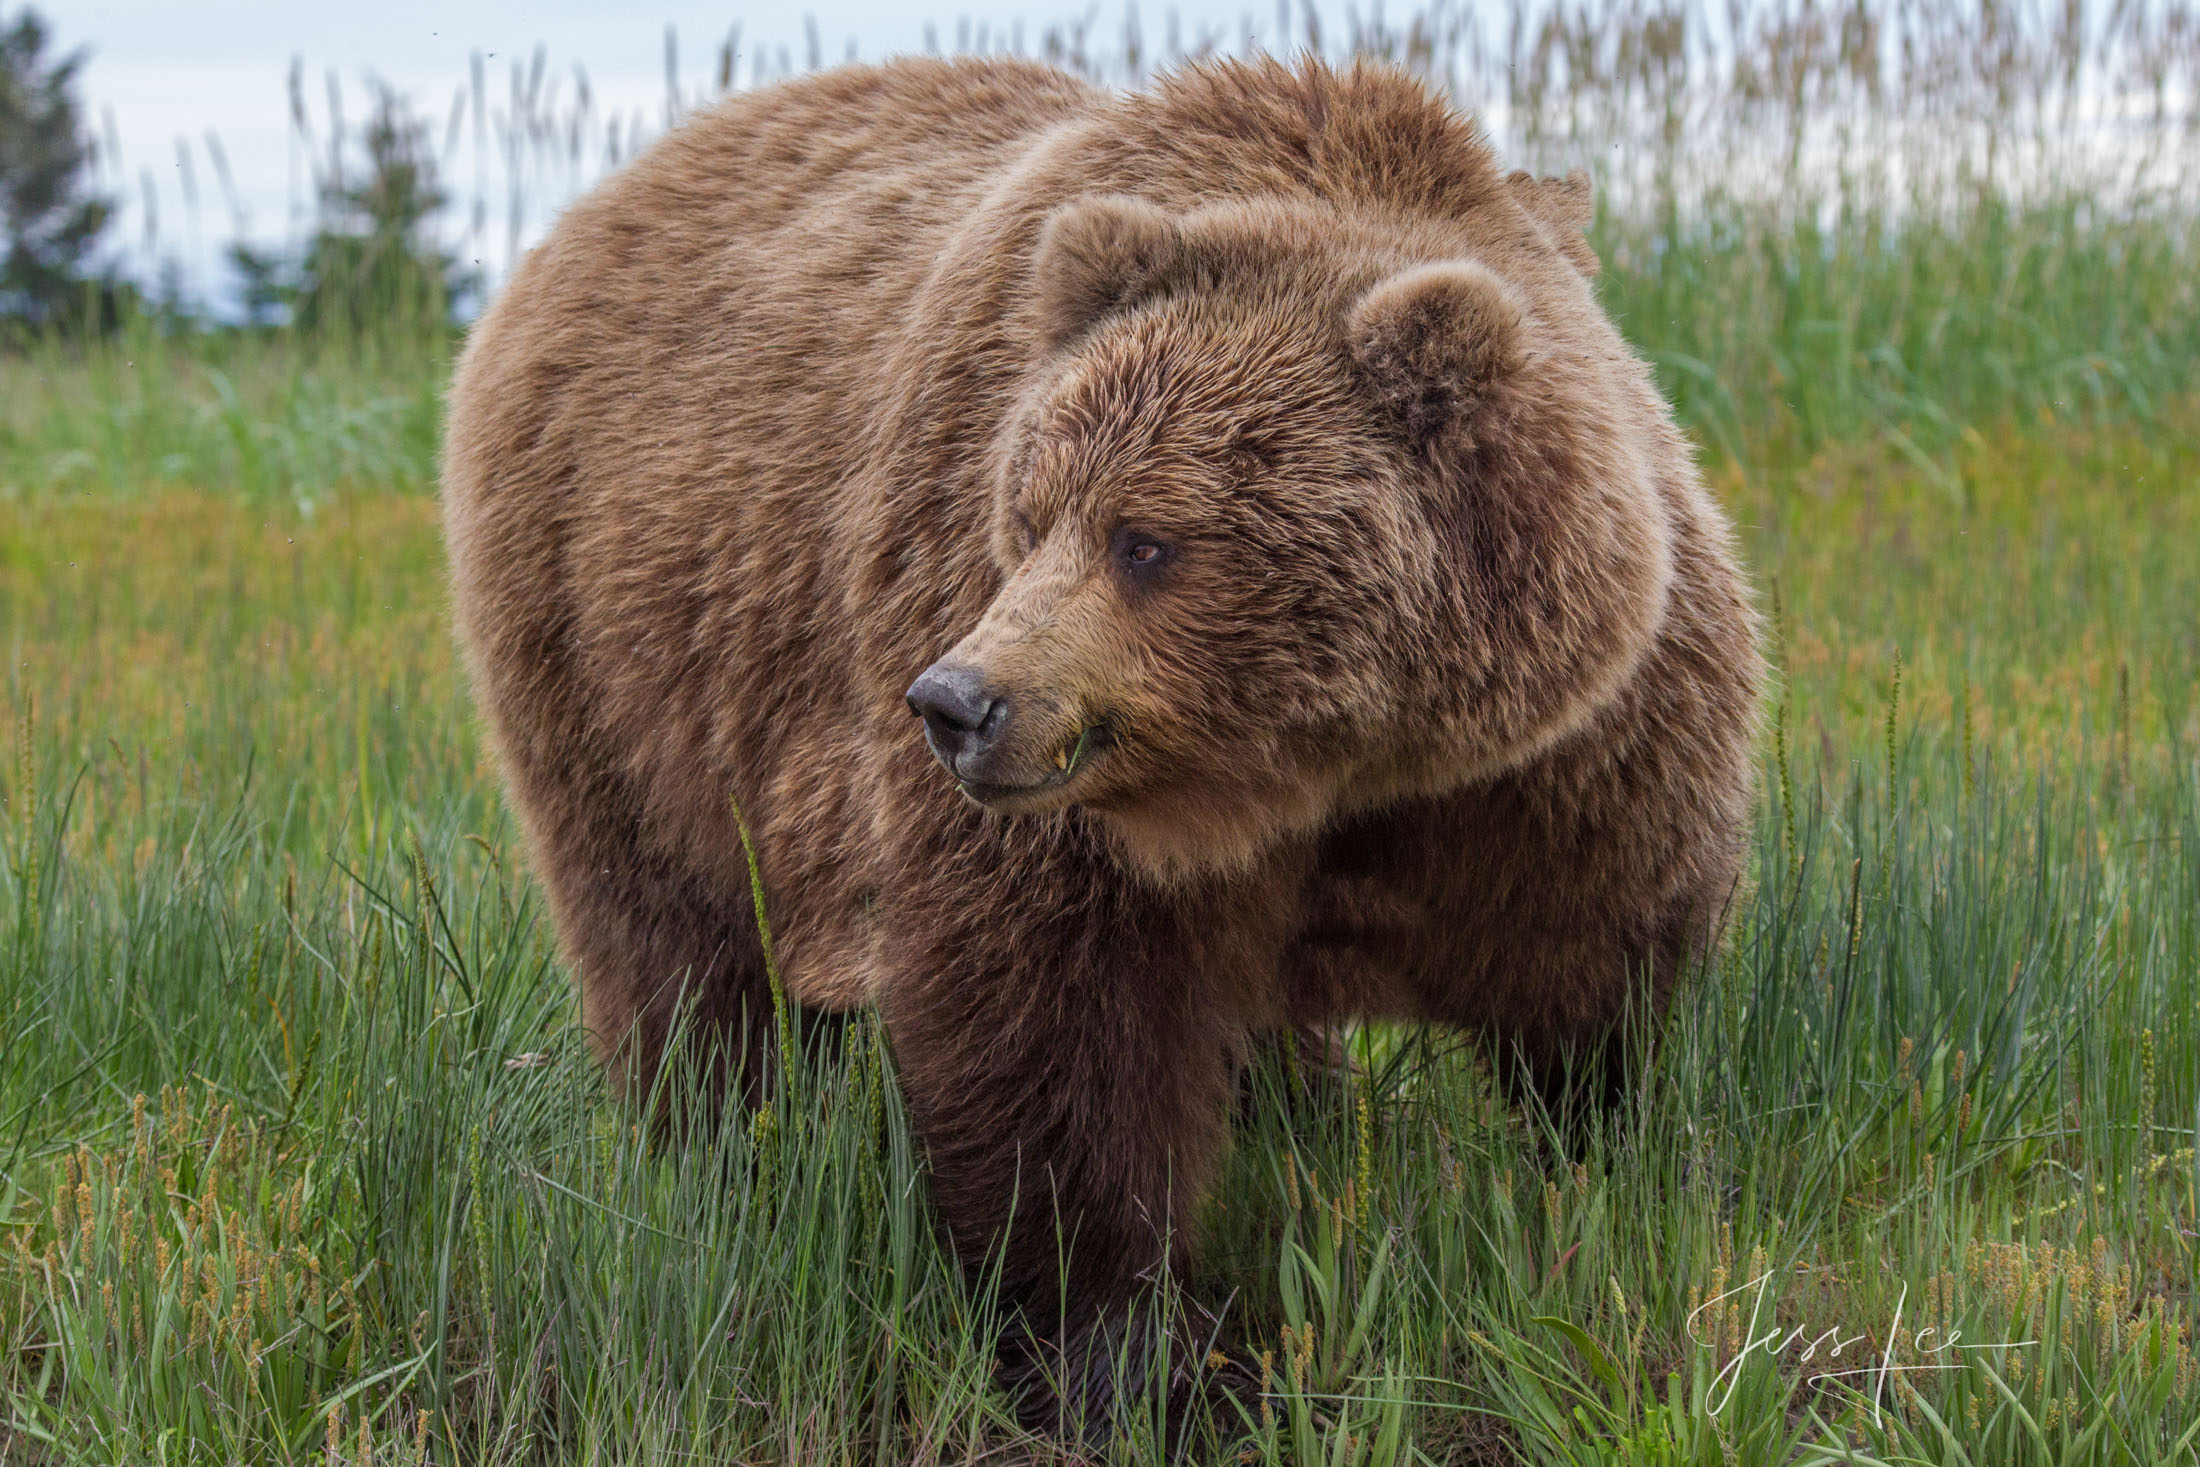 Grizzly, Bear, Looking to the side. Limited Edition Picture. These Grizzly bear photographs are offered as high-quality prints...